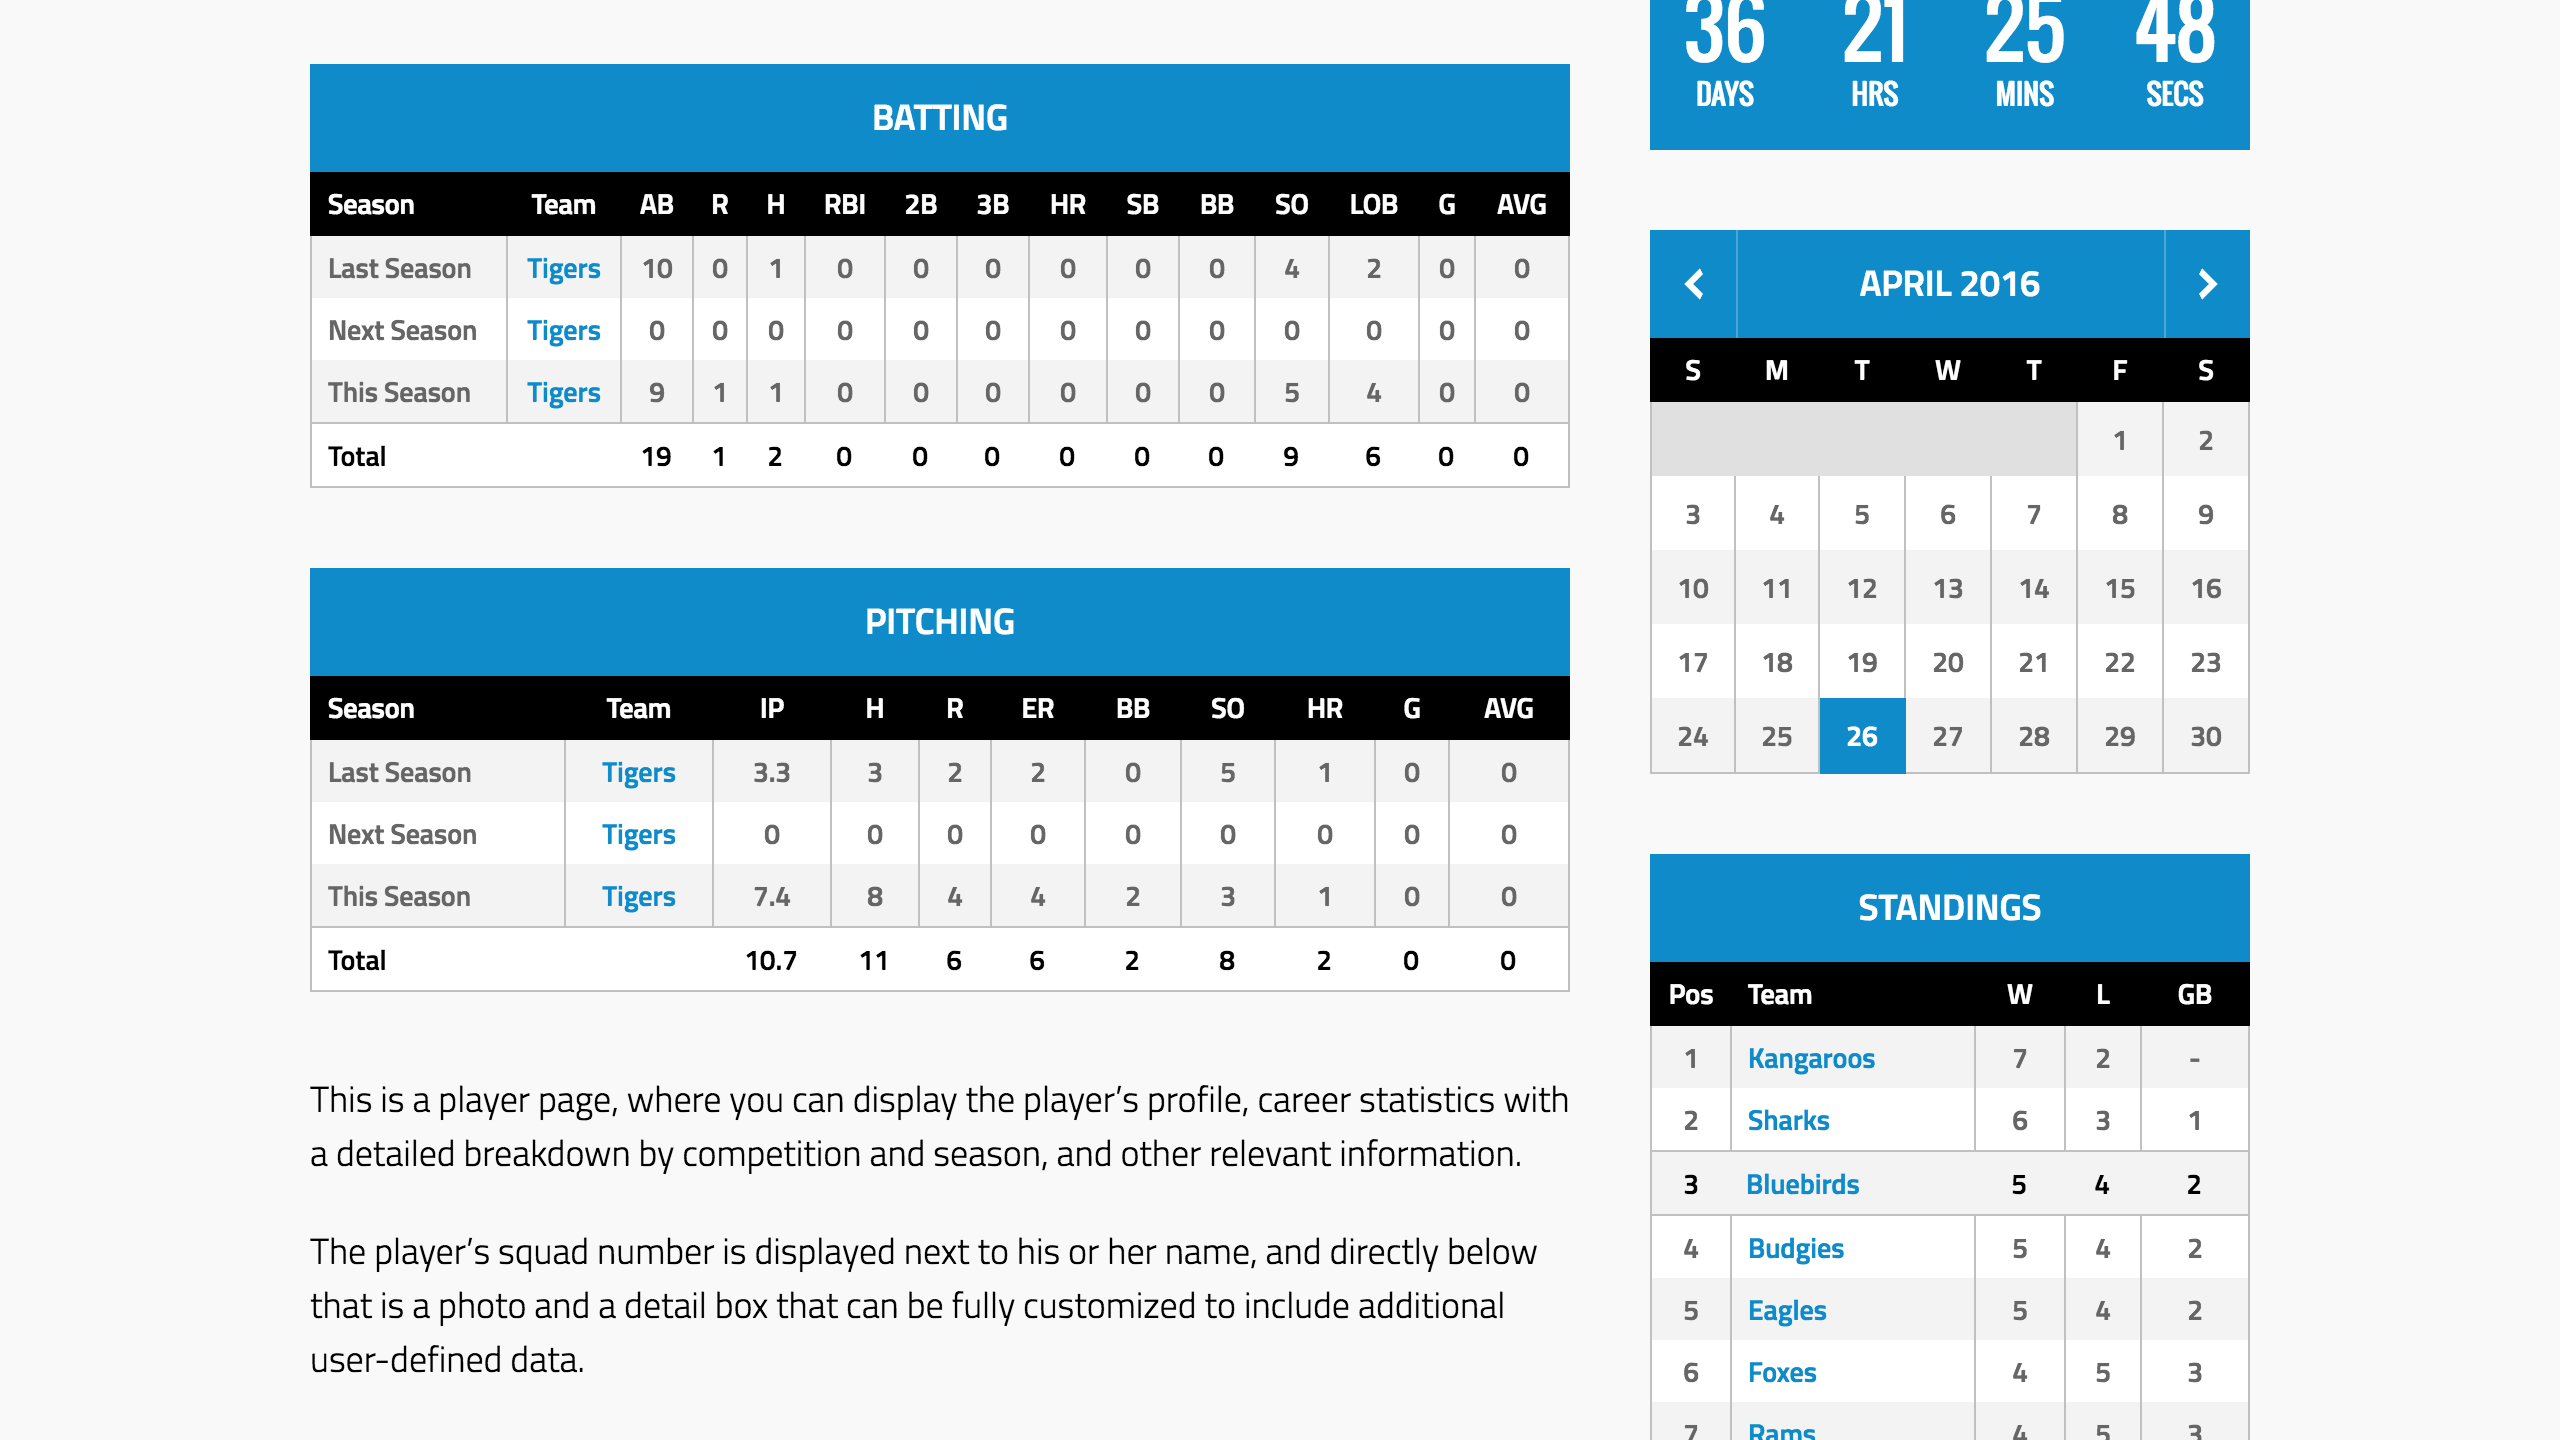 Player statistics in a pitcher's profile page.